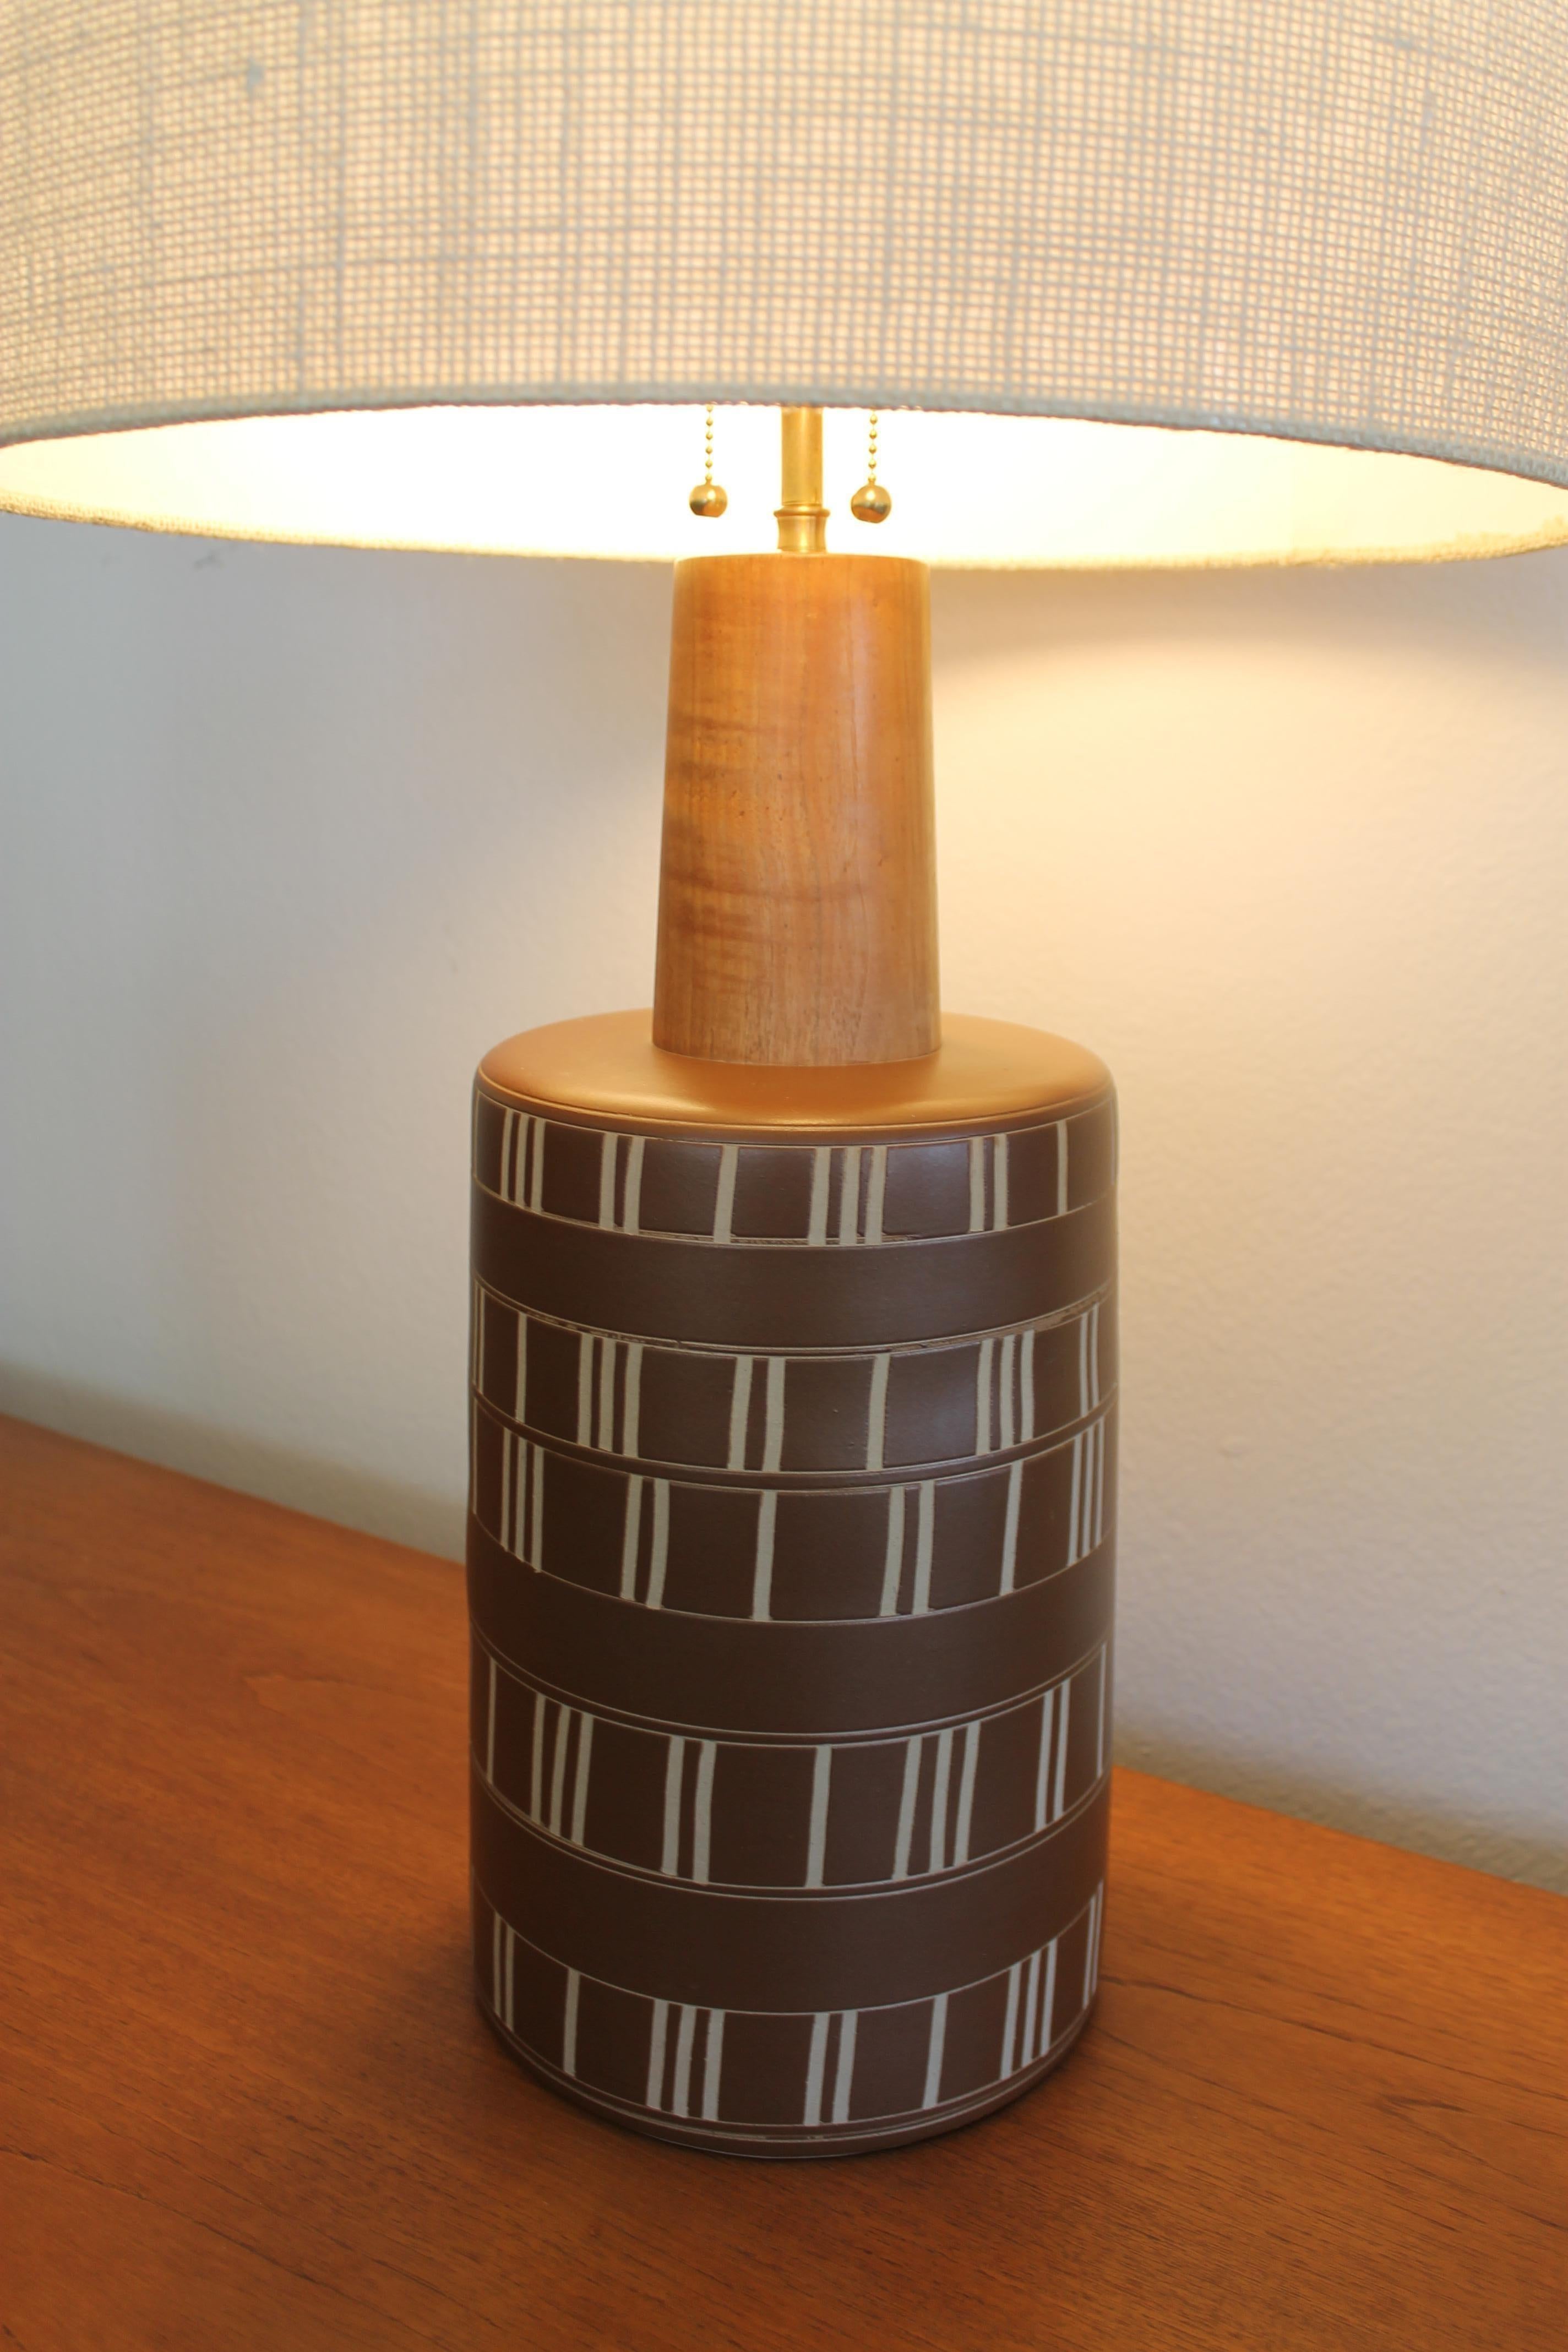 Martz table lamp by Marshall Studios, Inc. Veedersburg, Indiana. Lamp has an engraved Martz signature near the cord outlet. Lamp measures 29.5